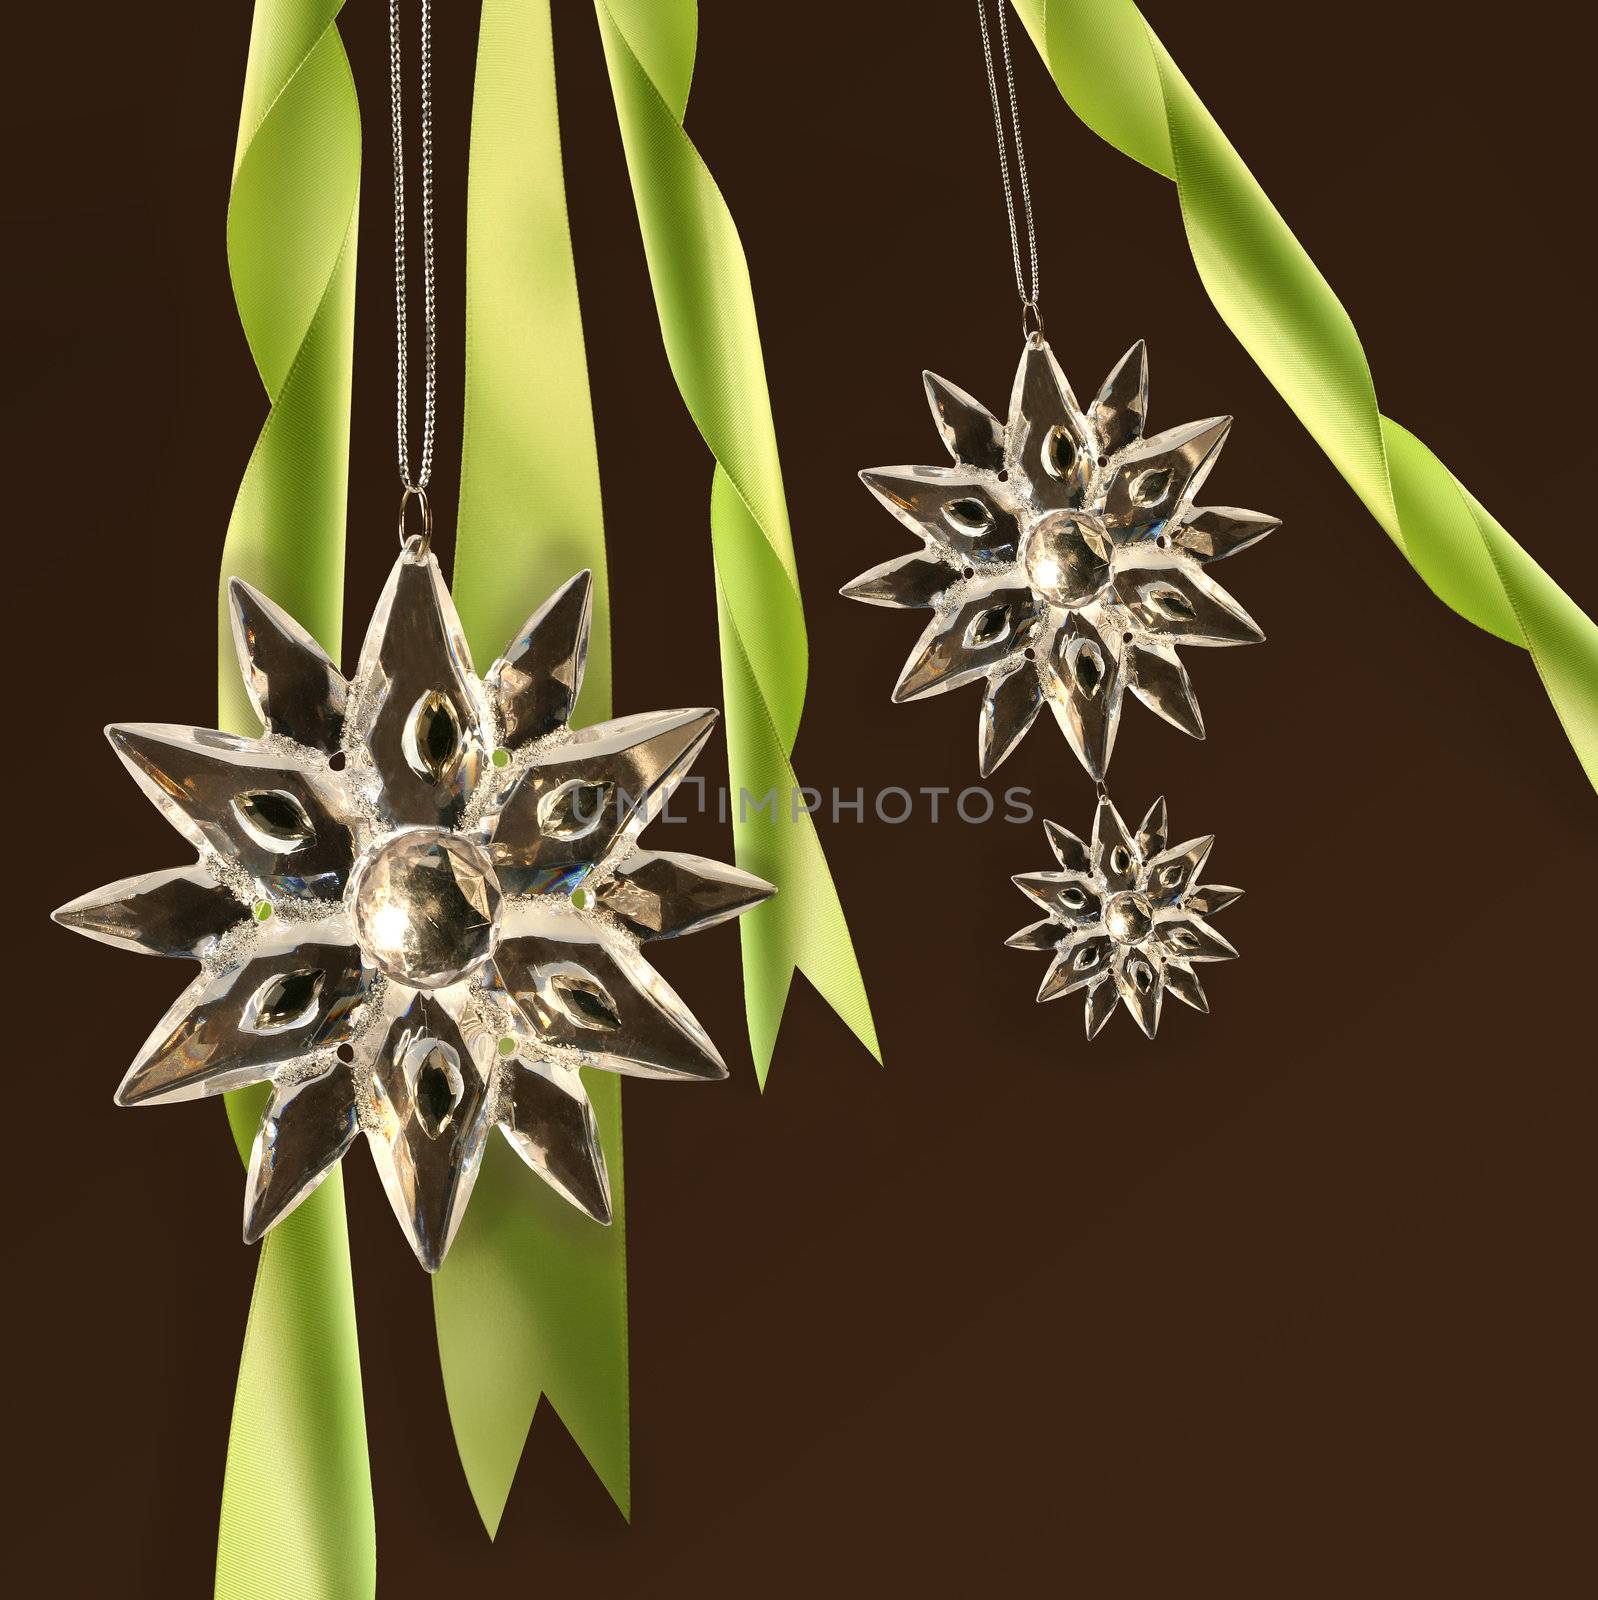 Crystal snowflakes with green ribbons on dark background